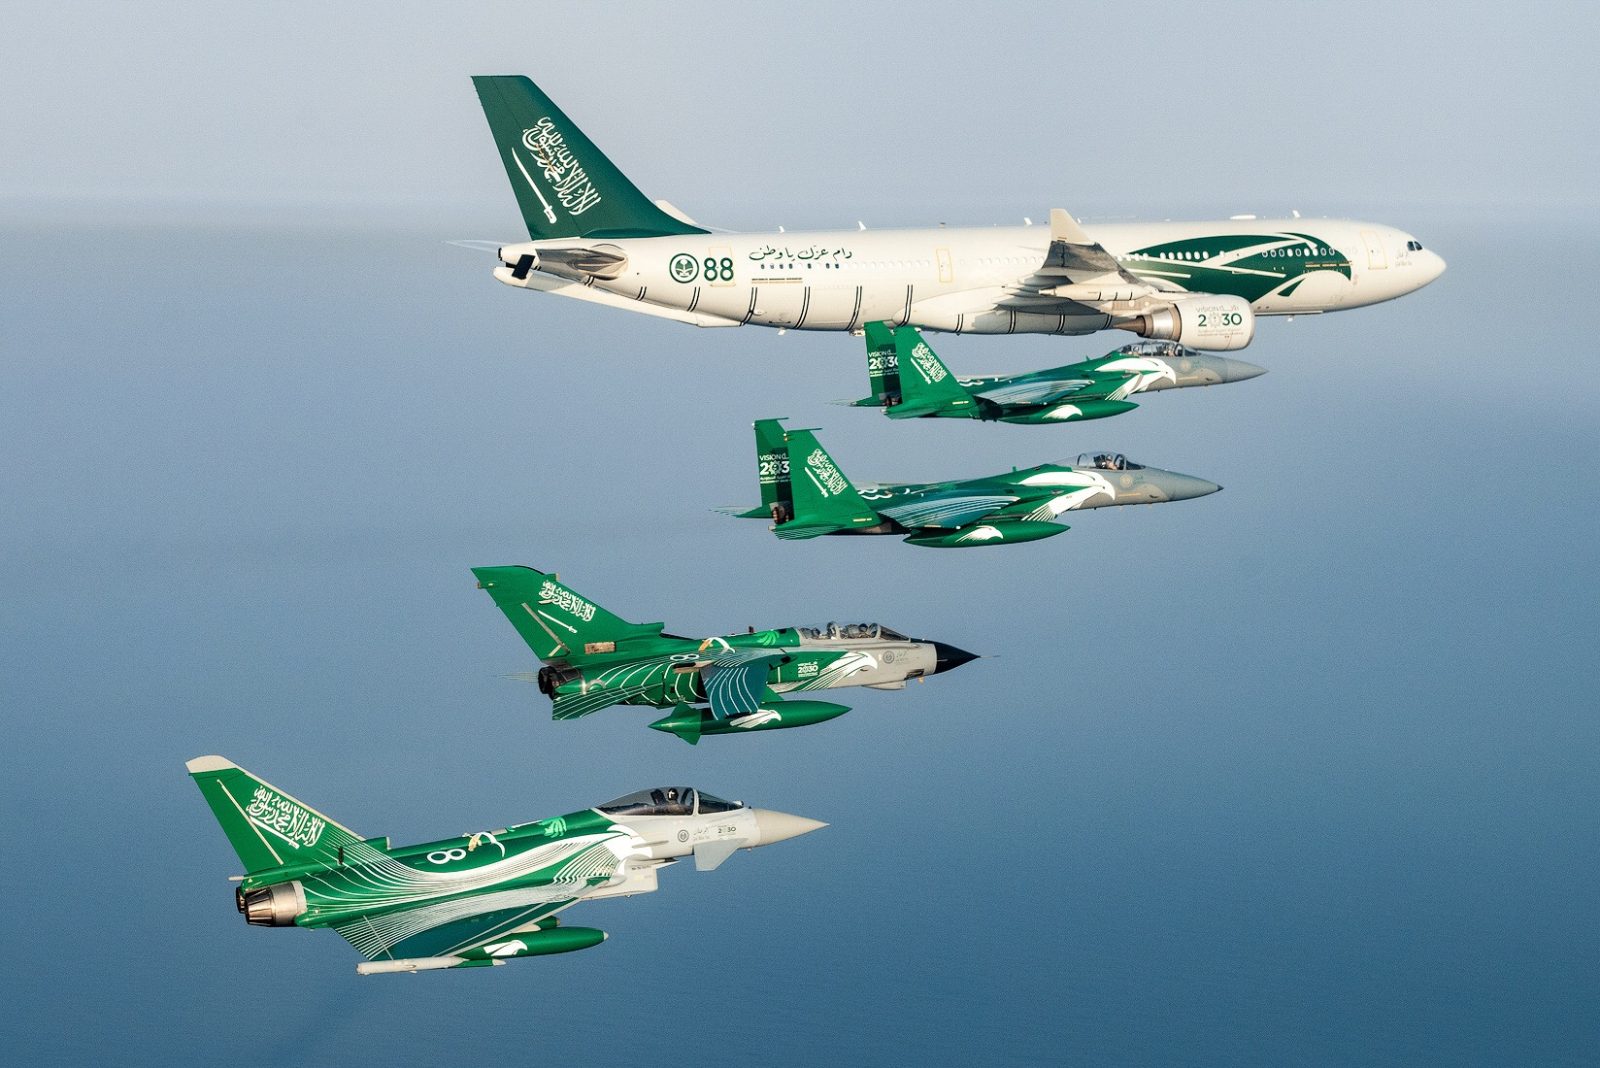 Air-to-Air Shots of the Saudi Special Colored Aircraft during the 88th National Day Celebrations